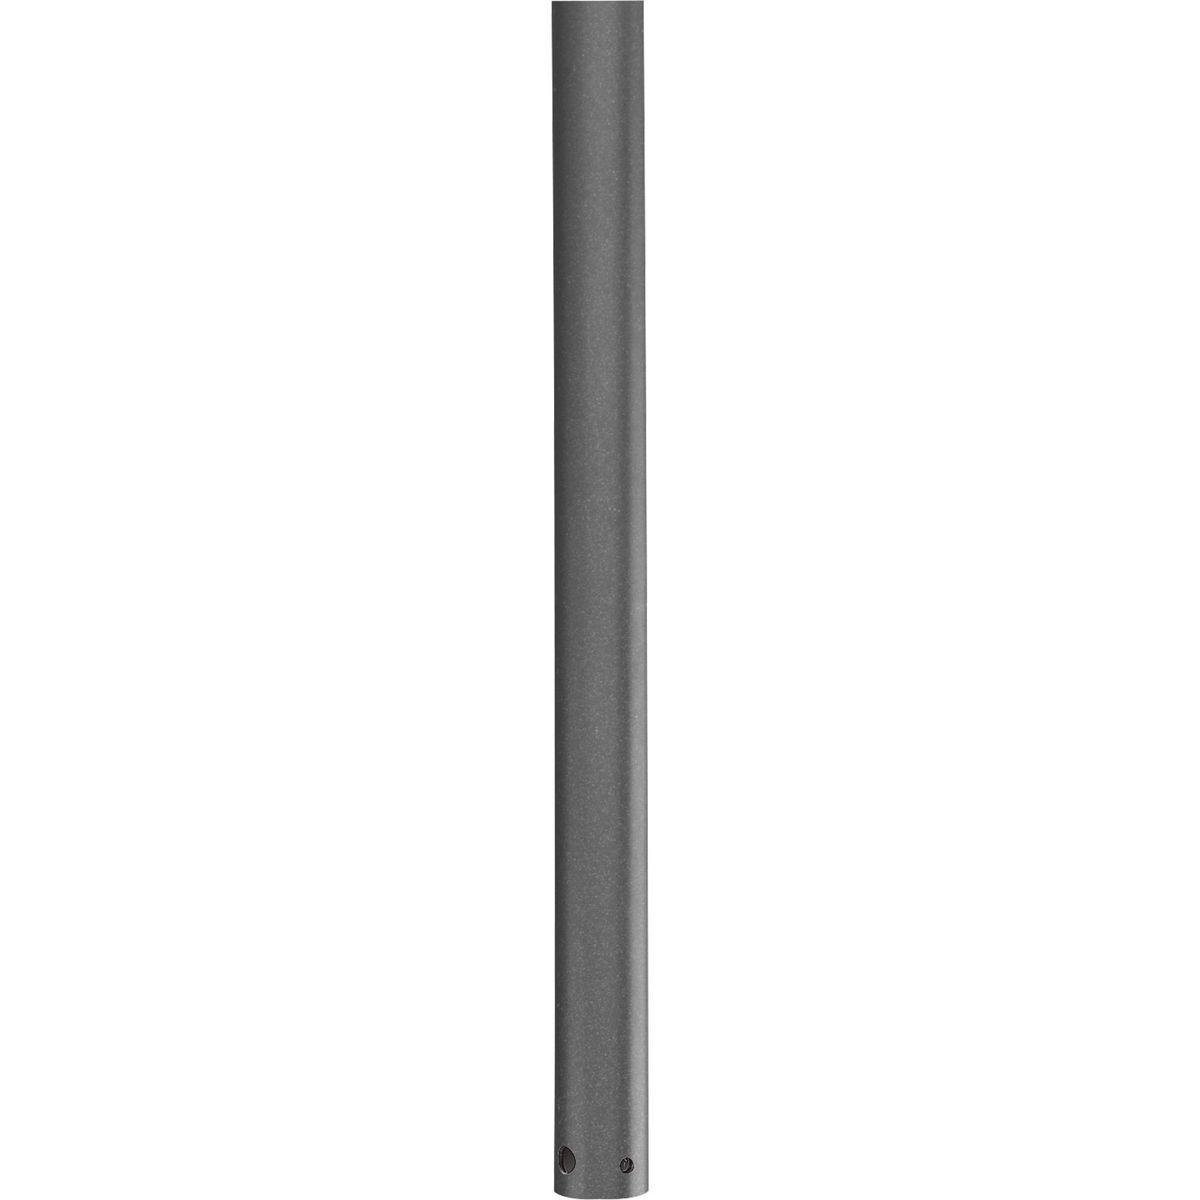 Hubbell P2607-143 3/4 In. x 48 In. downrod for use with any Progress Lighting ceiling fan. Use of a fan downrod positions your ceiling fan at the optimal height for air circulation and provides the perfect solution for installation on high cathedral ceilings or in great ro